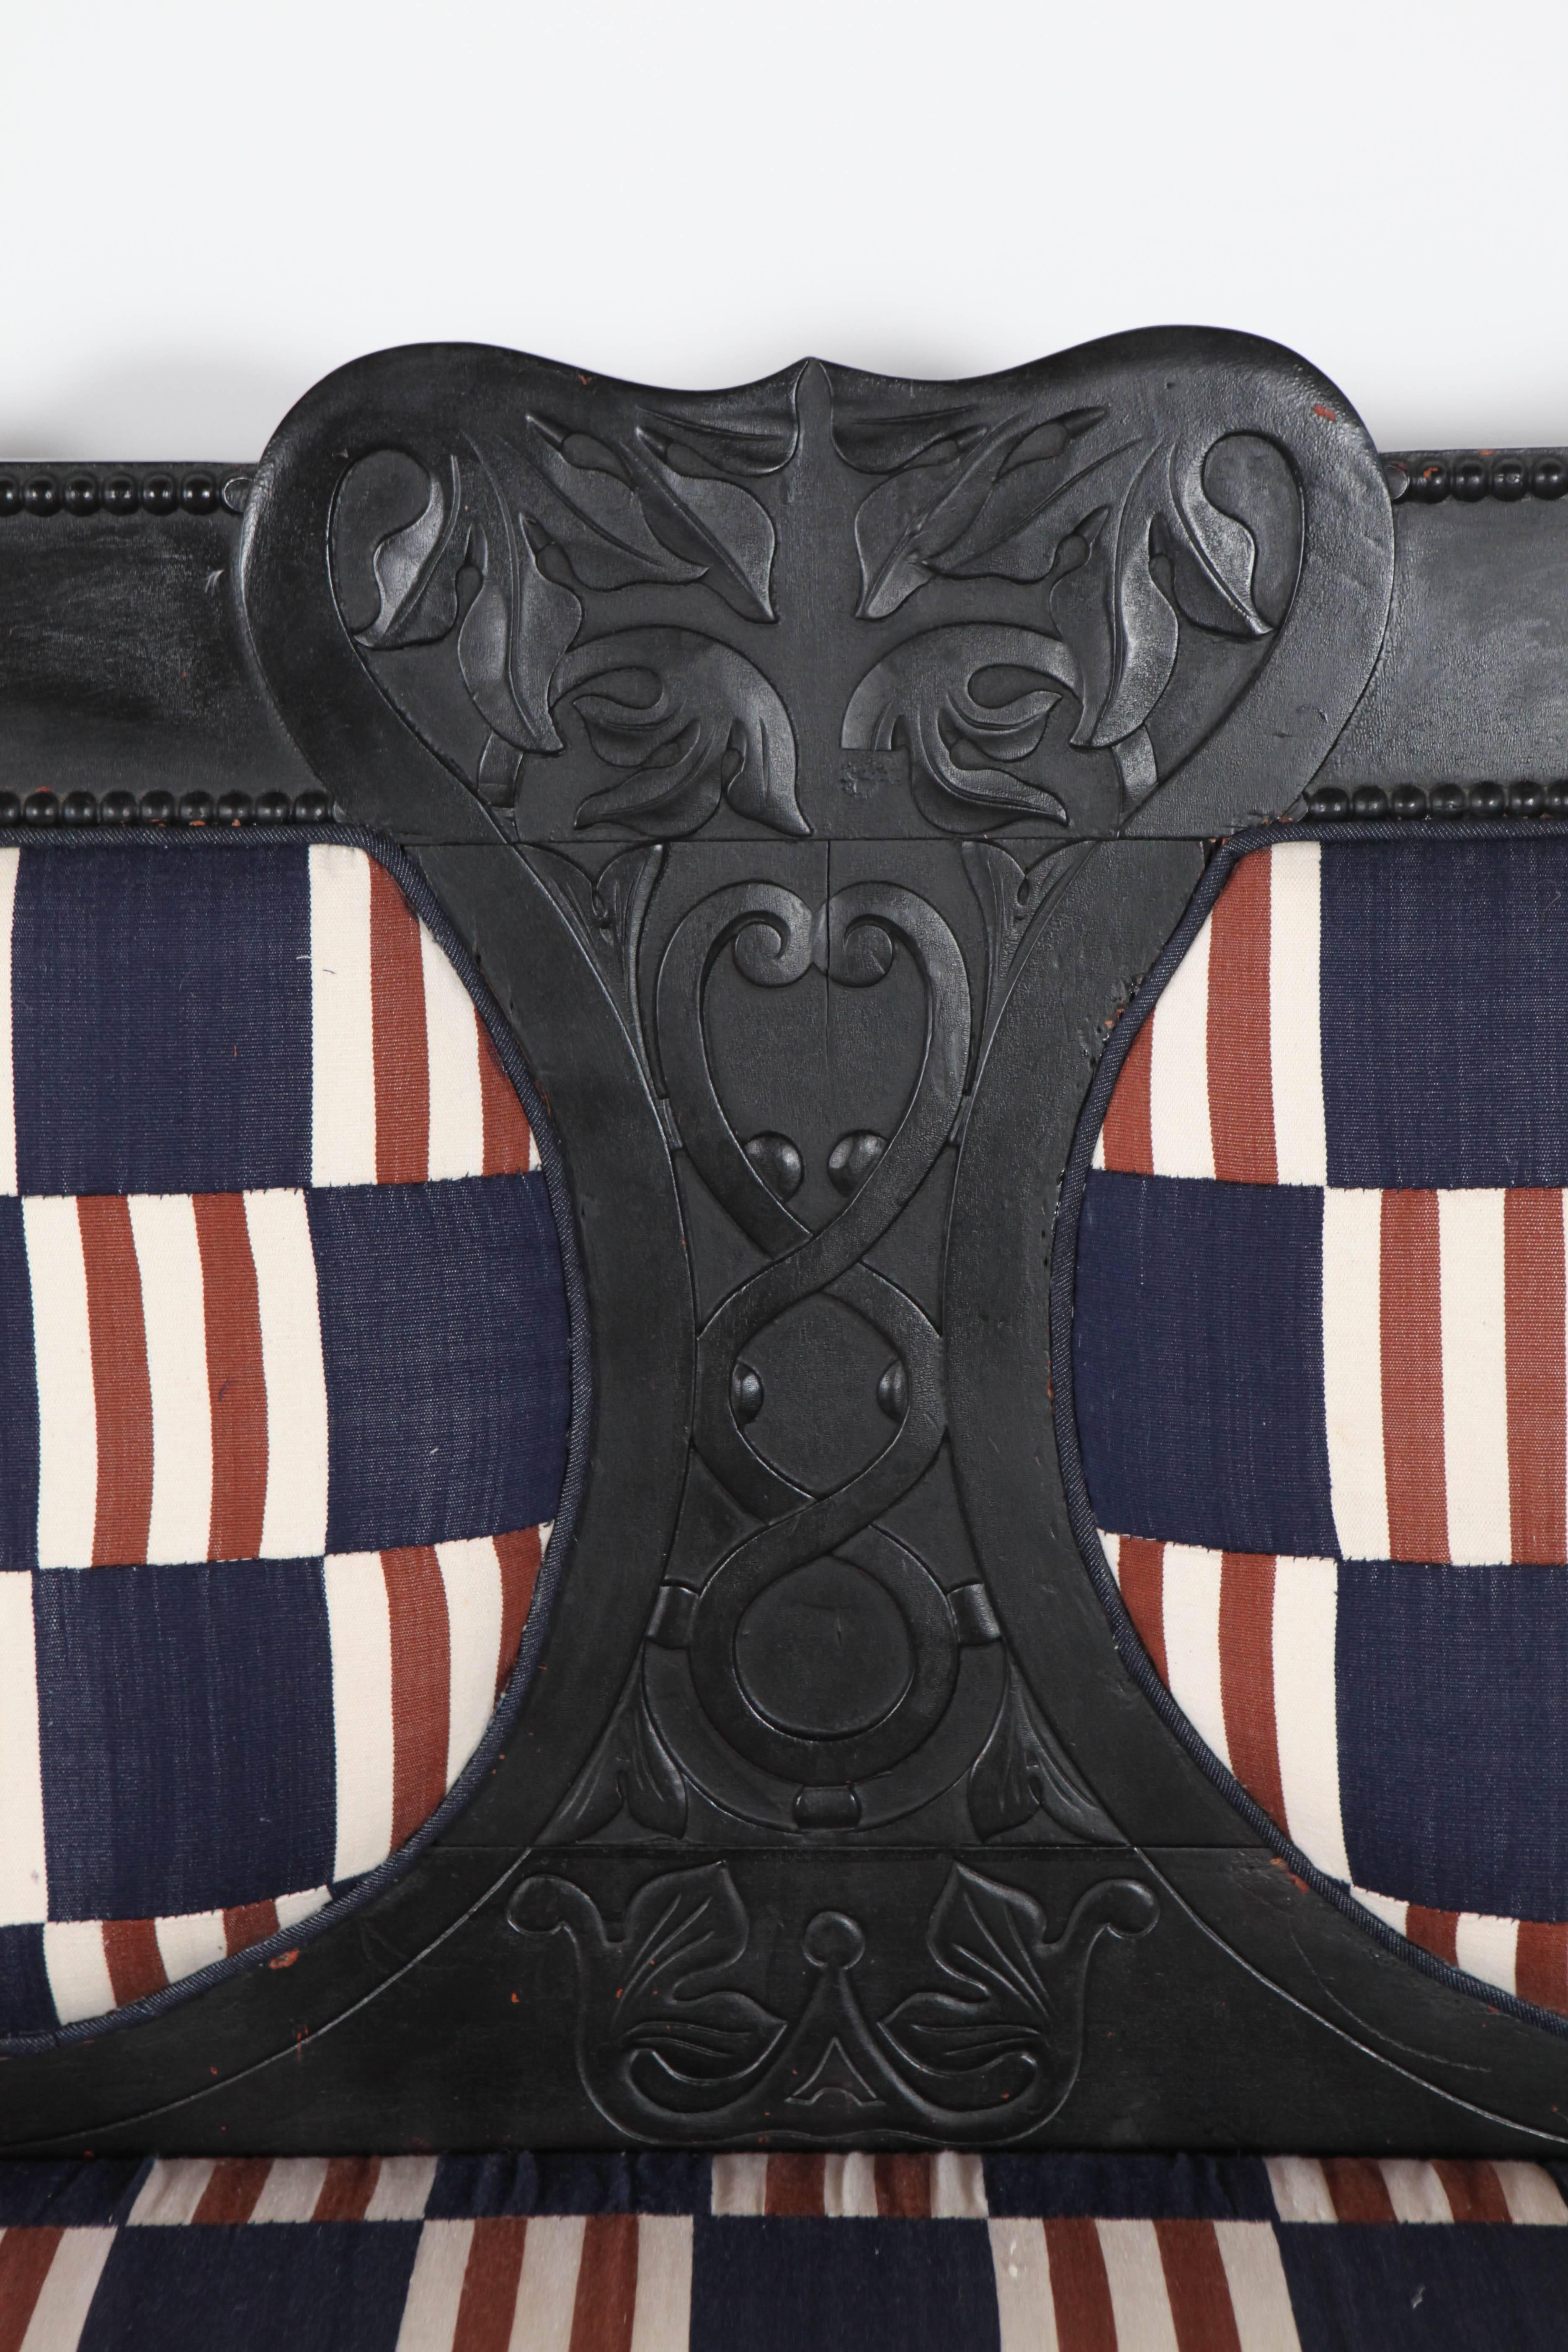 Striking silhouettes with bold graphic patterns and colors on Edwardian style settee. Smaller size also available.